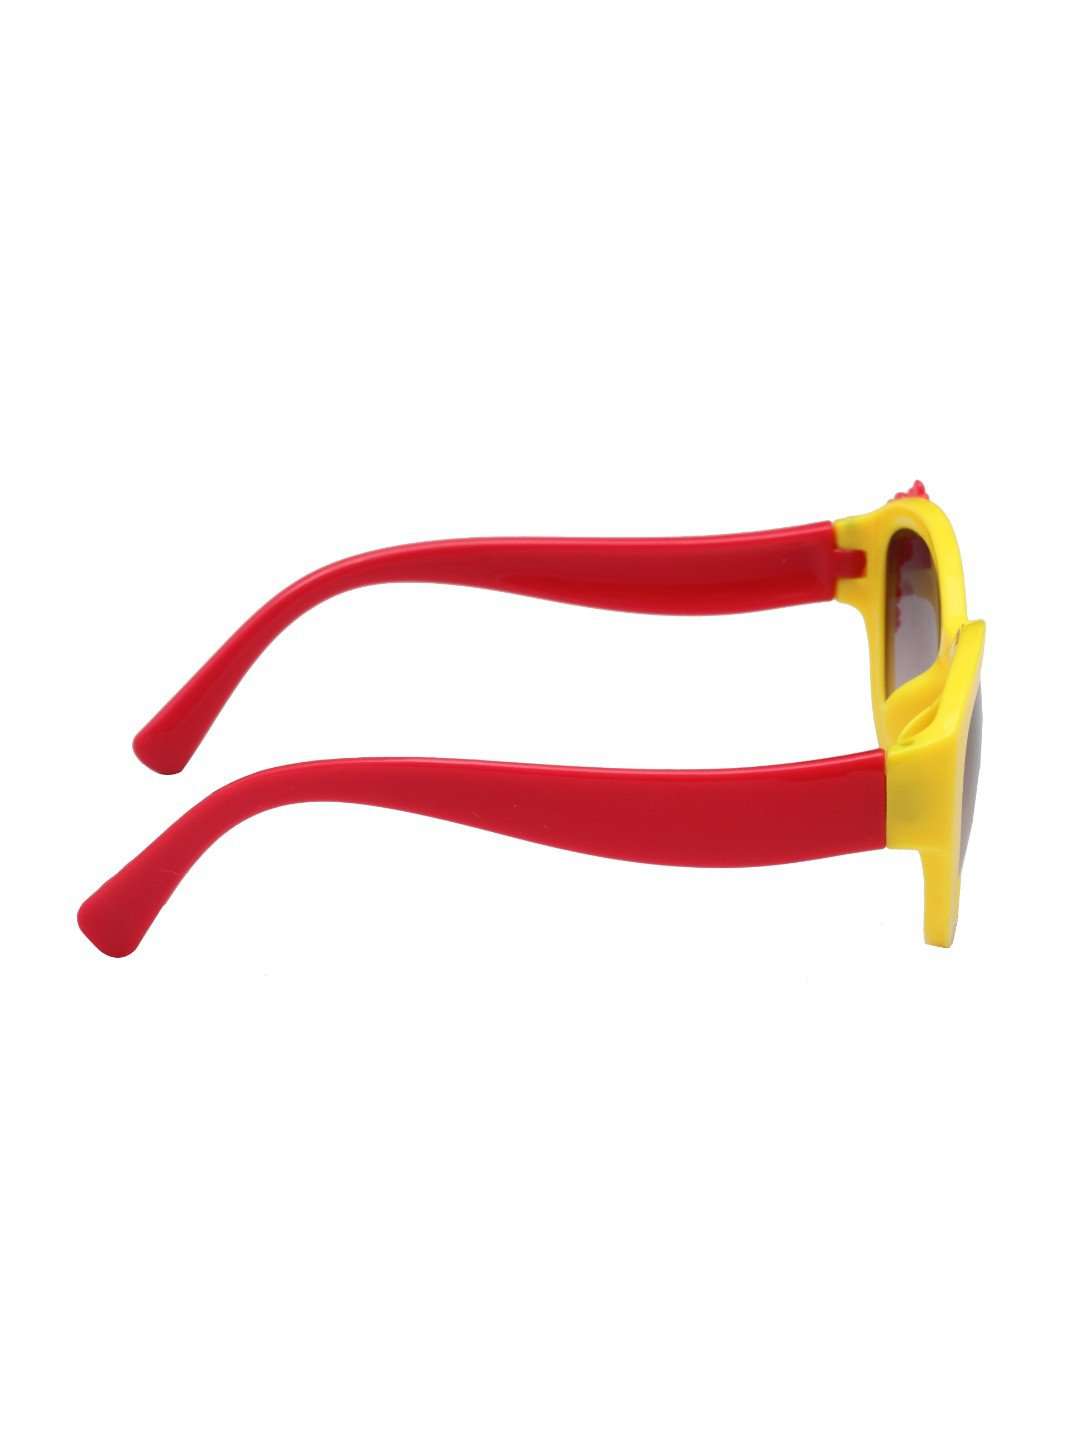 Stol'n Kids Yellow and Red Flower Applique Cat Eye Sunglasses - SWHF